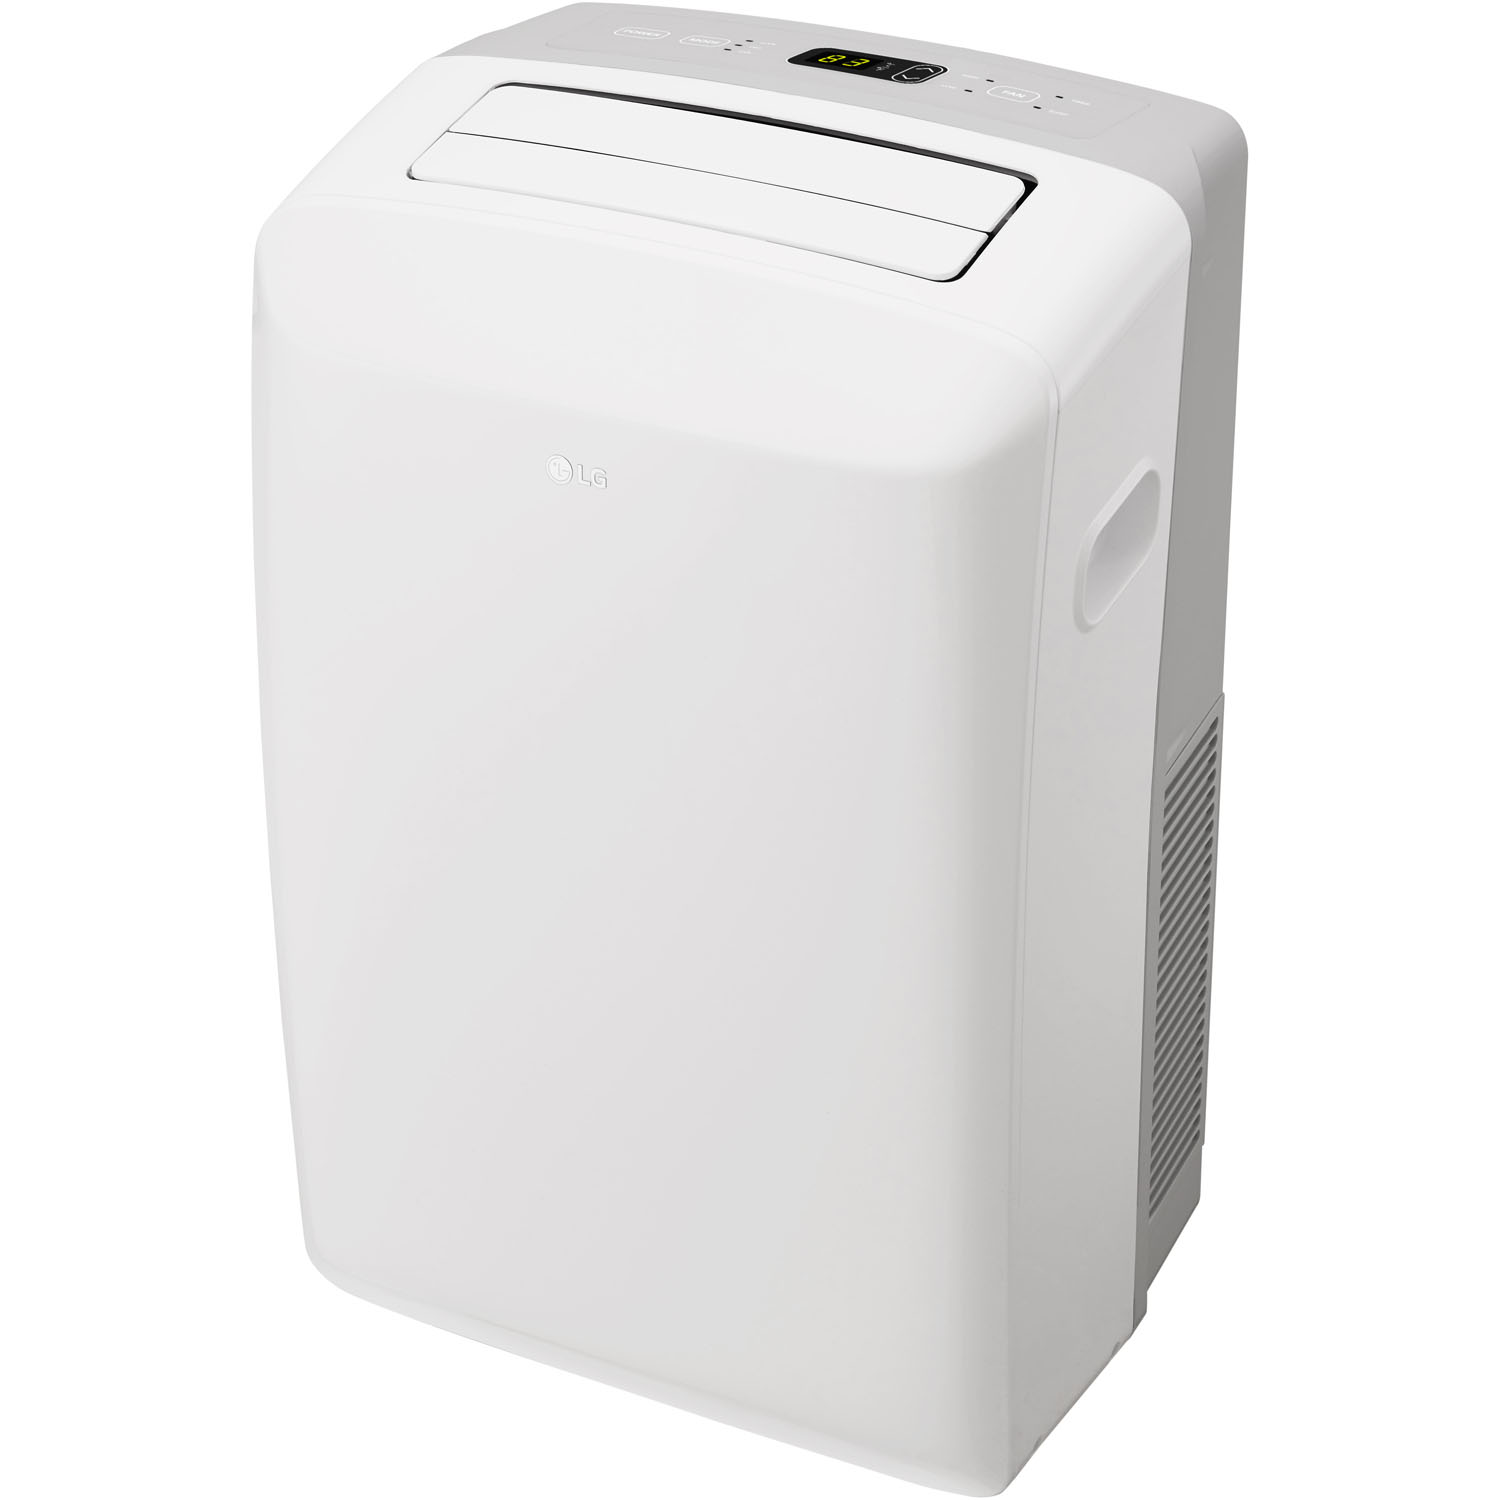 LG 115V Portable Air Conditioner with Remote Control in White for Rooms up to 200 Sq. Ft. - image 3 of 7